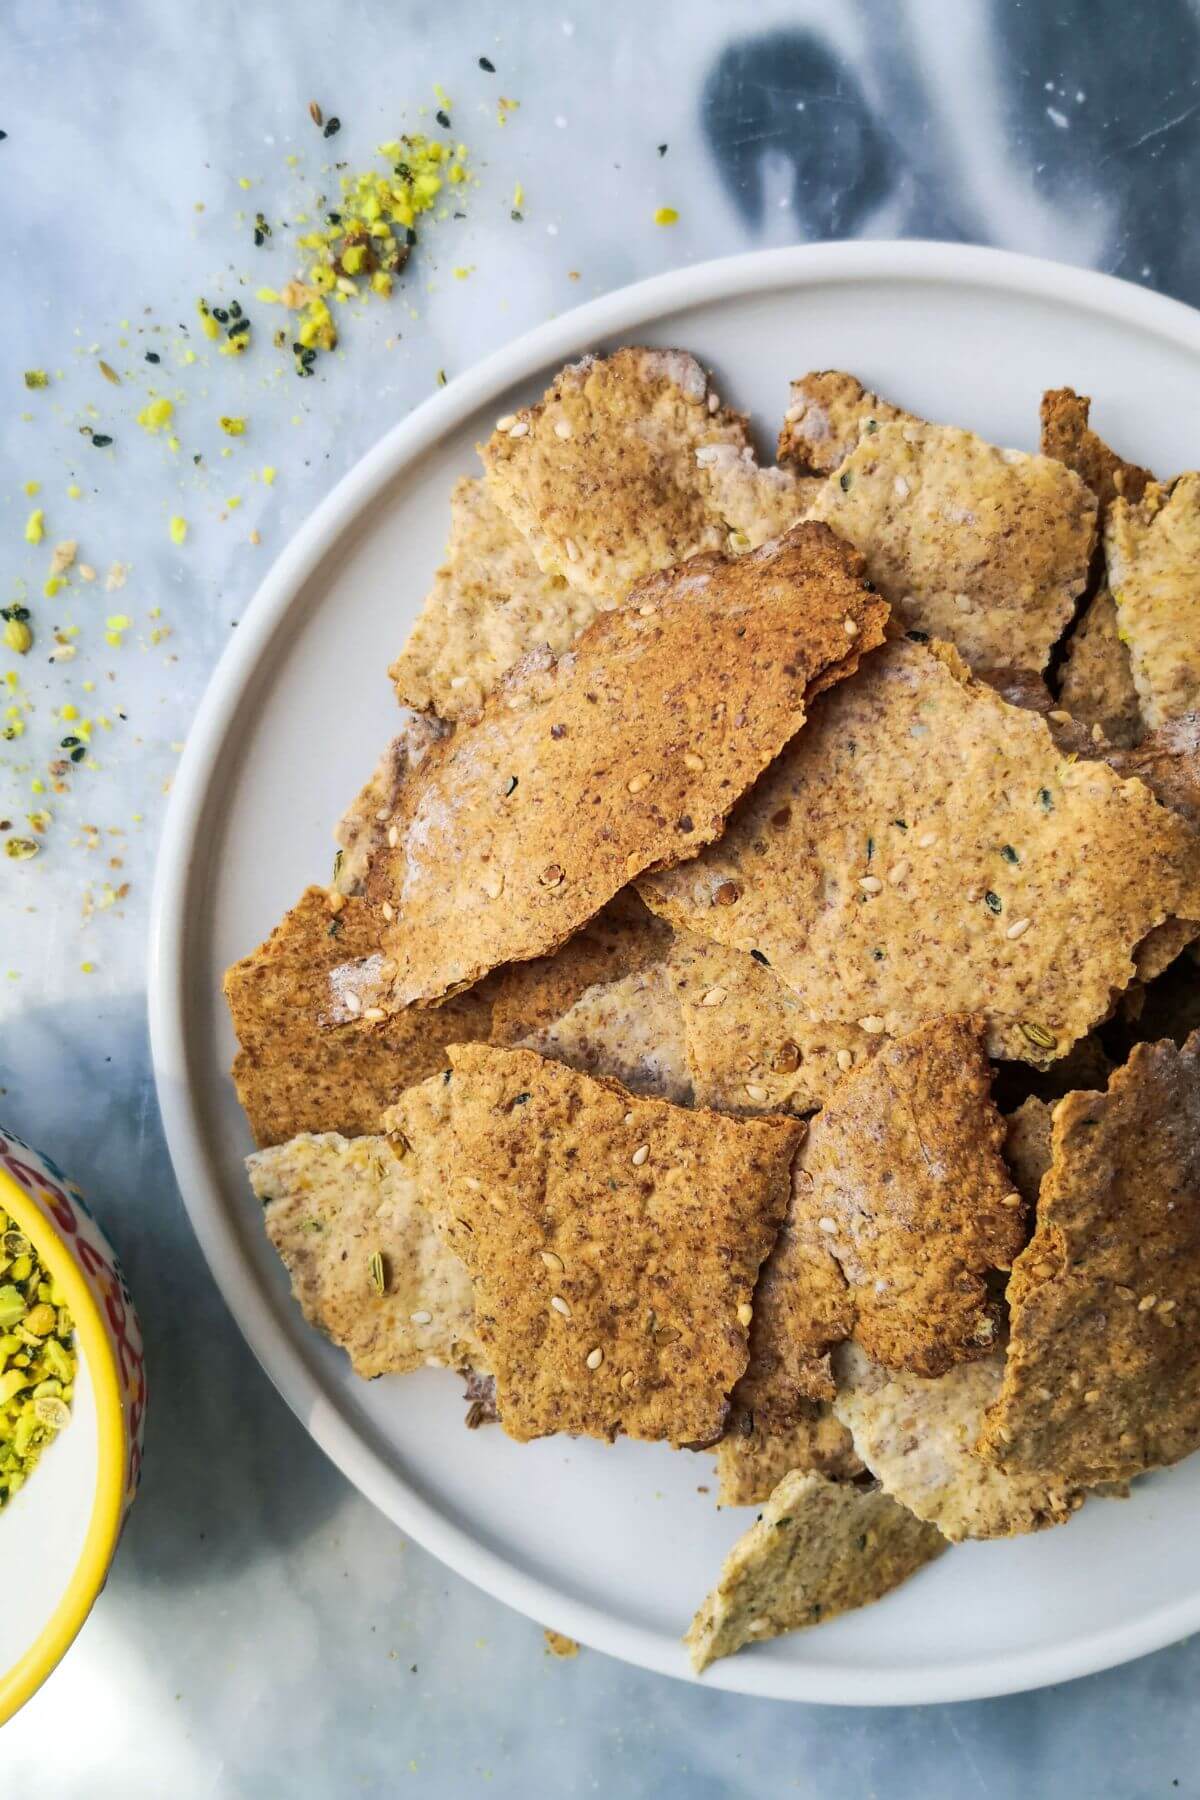 Sourdough crackers on a small white plate with a little bowl of dukkah on the side.